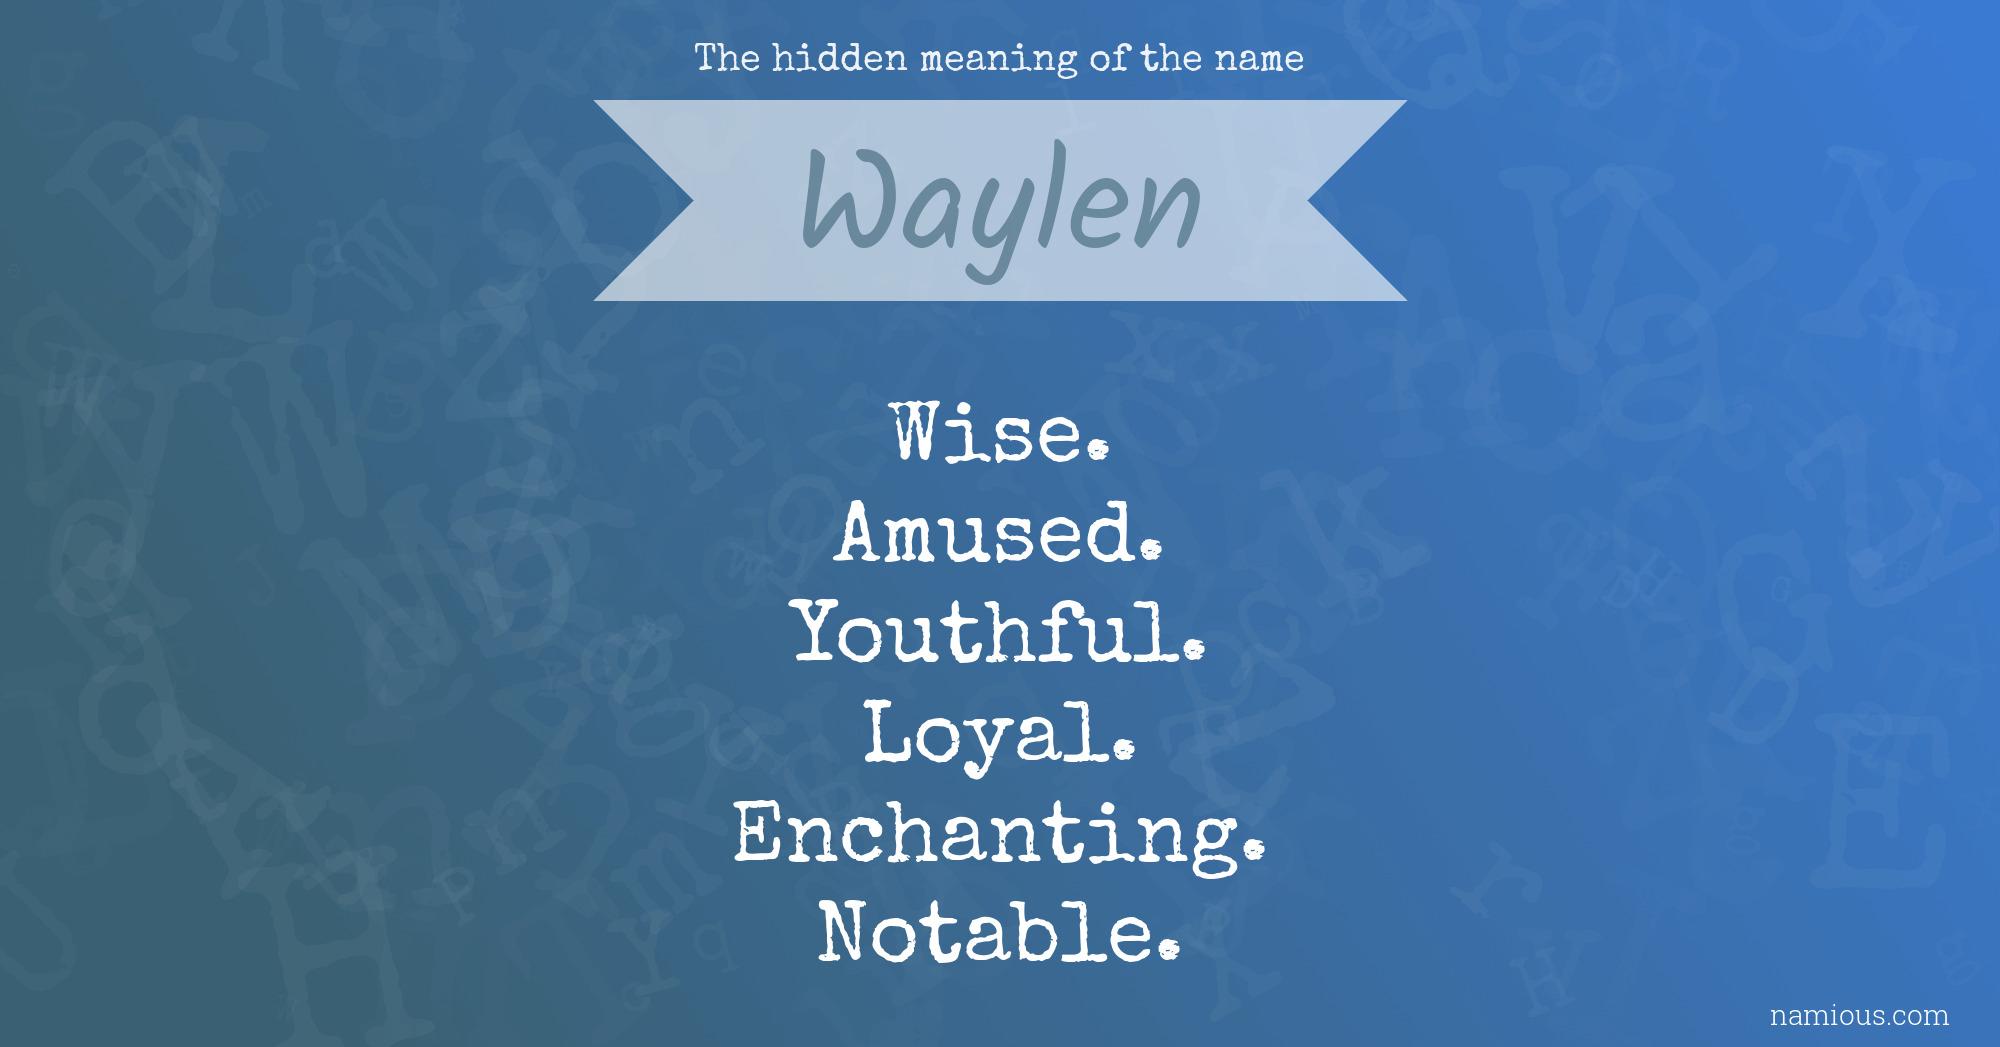 The hidden meaning of the name Waylen